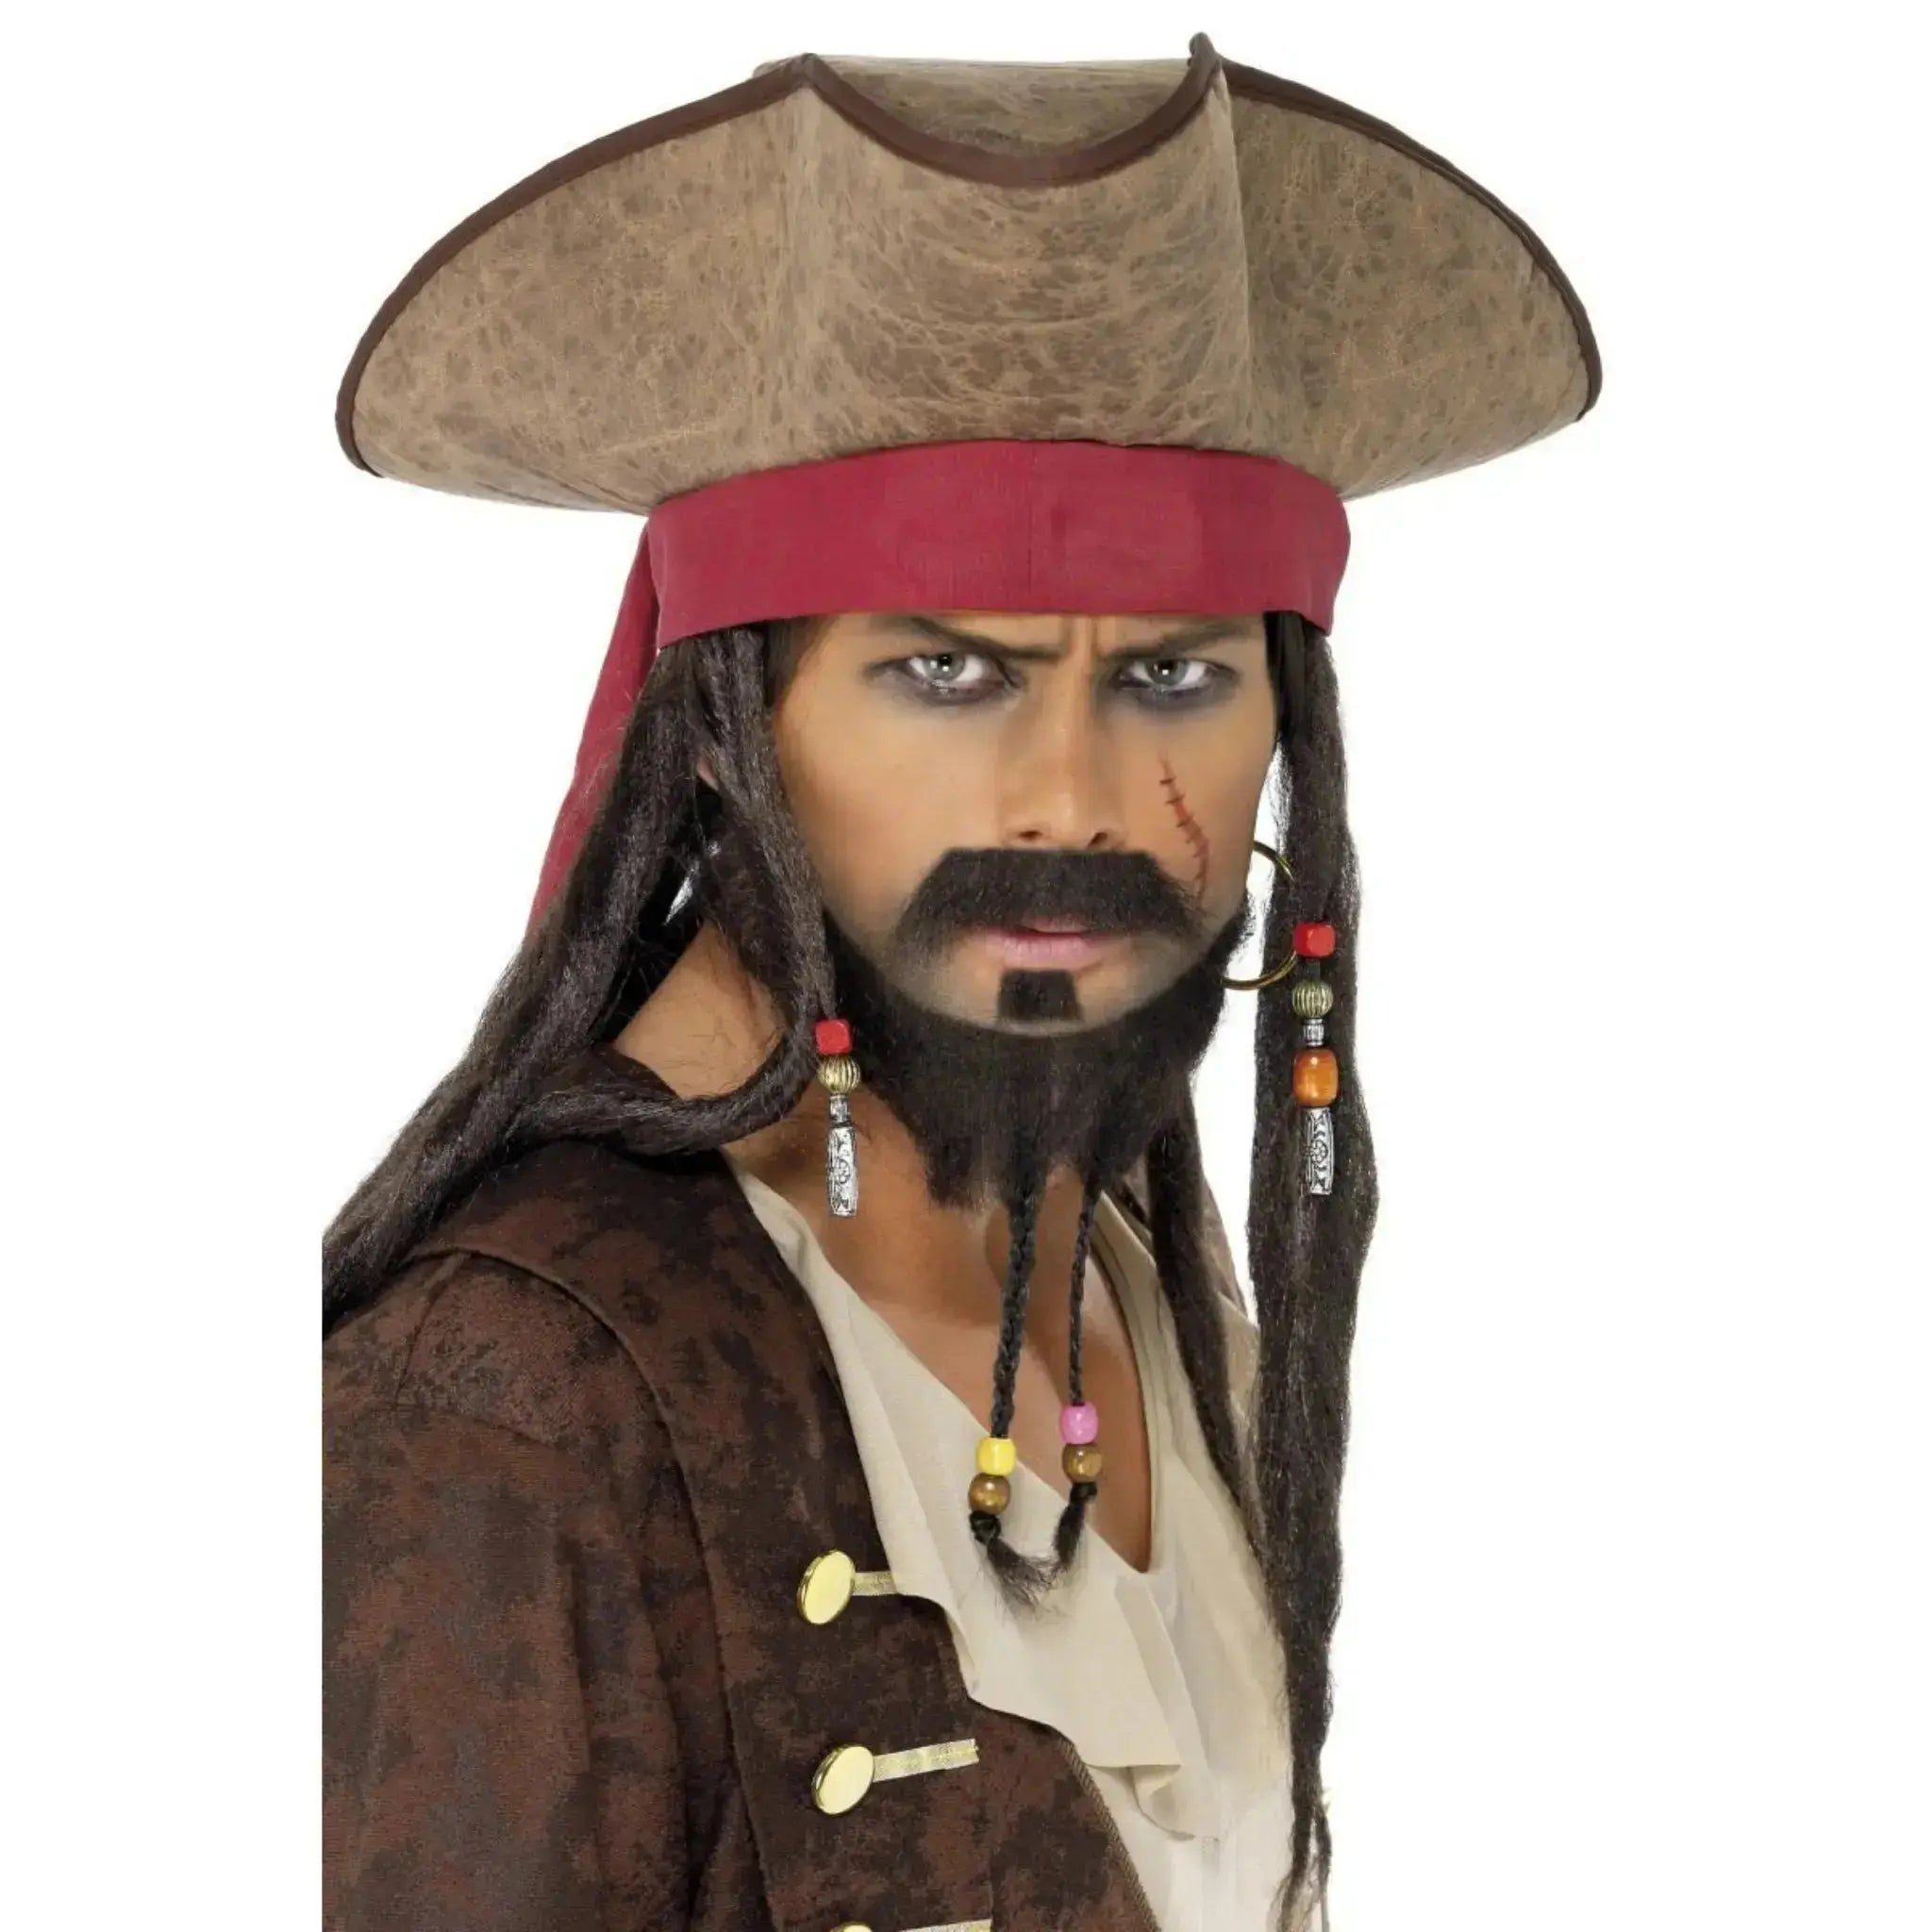 Pirate Hat, Brown, with Hair Dreadlocks | The Party Hut